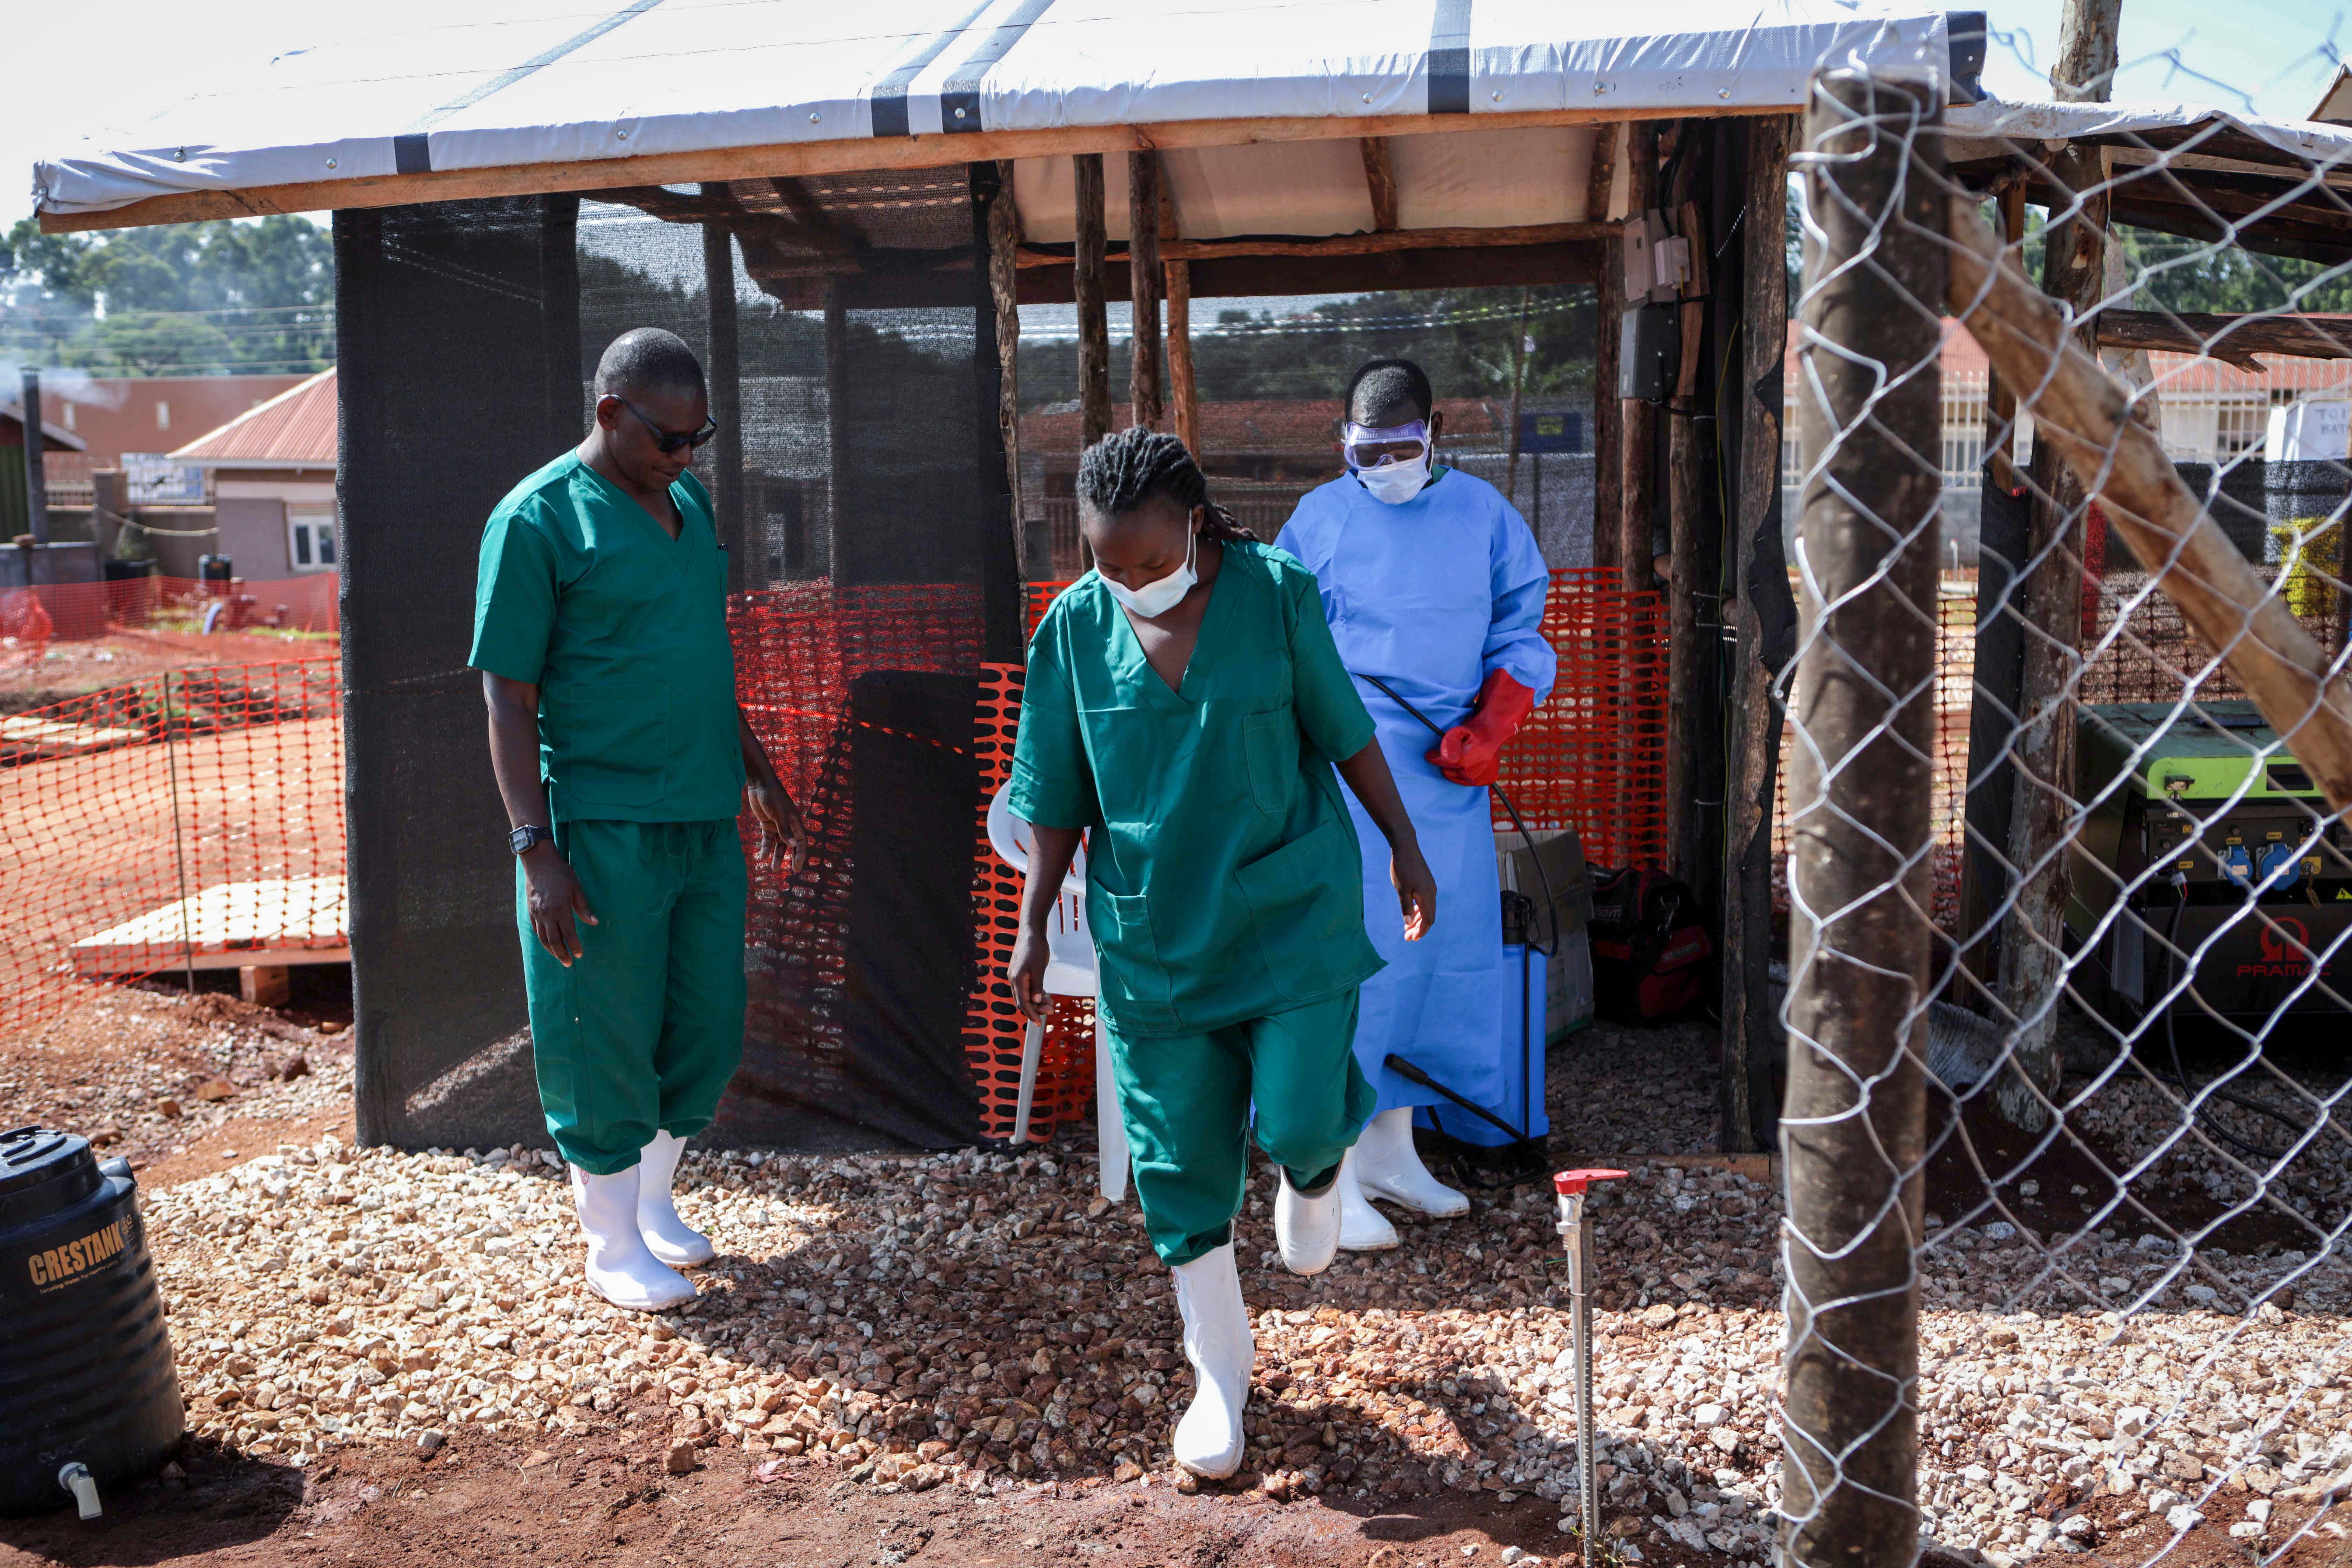 A medical attendant disinfects the rubber boots of a medical officer before leaving the Ebola isolation section of Mubende Regional Referral Hospital, in Mubende, Uganda